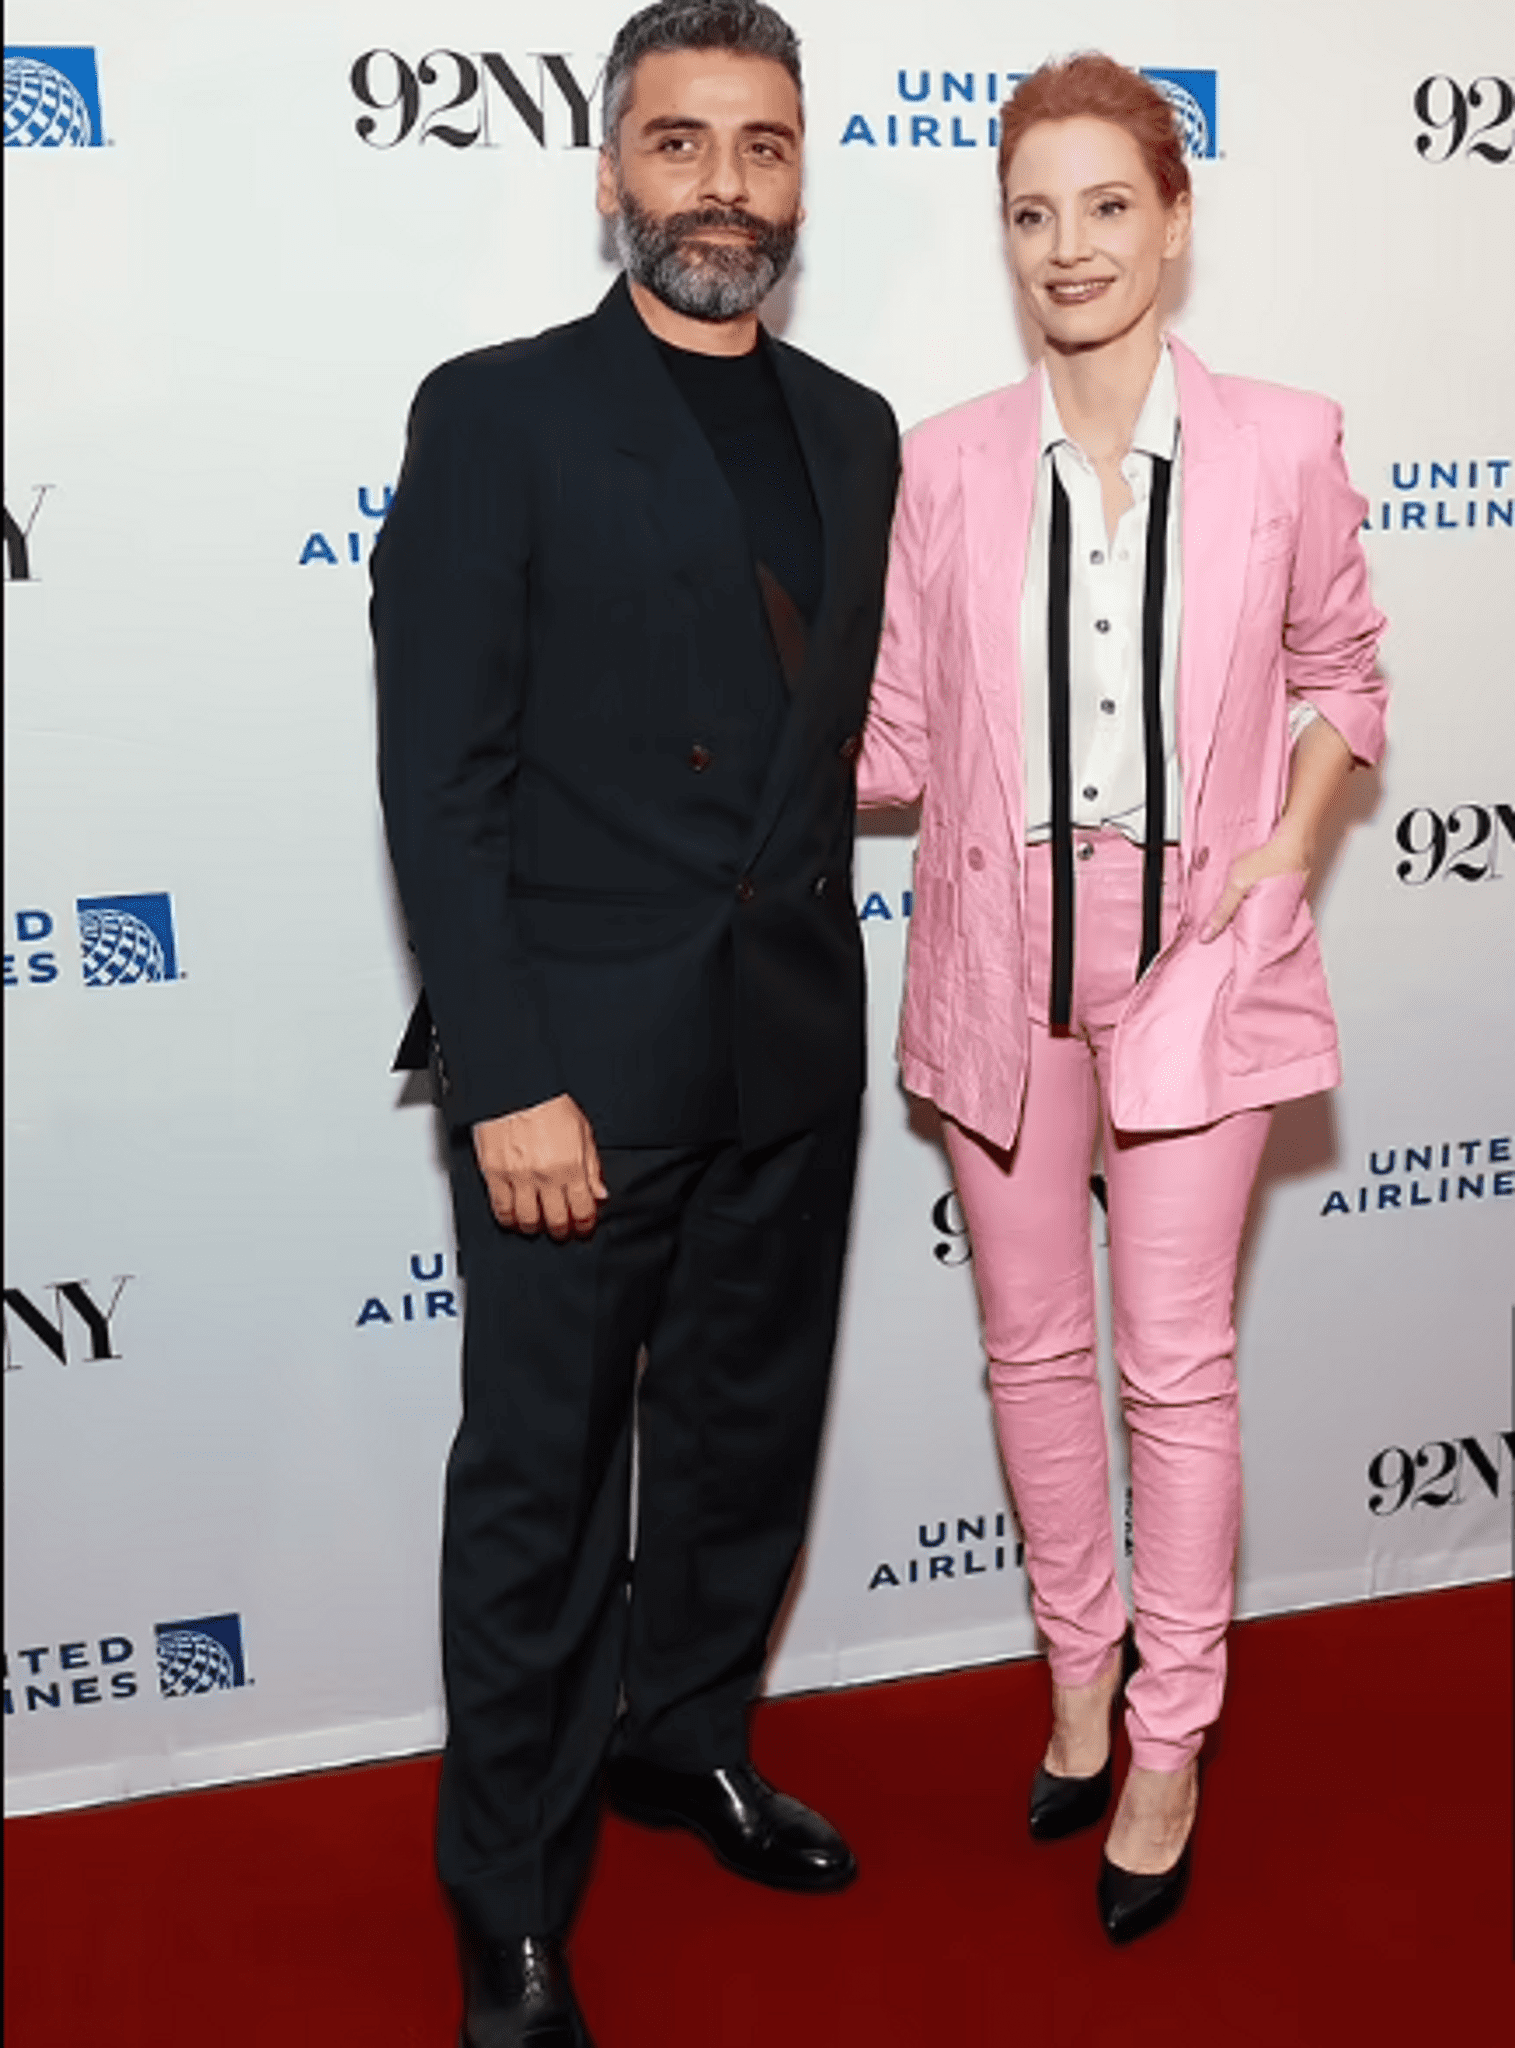 Check out Jessica Chastain in a pink suit that matches her hair color amazingly